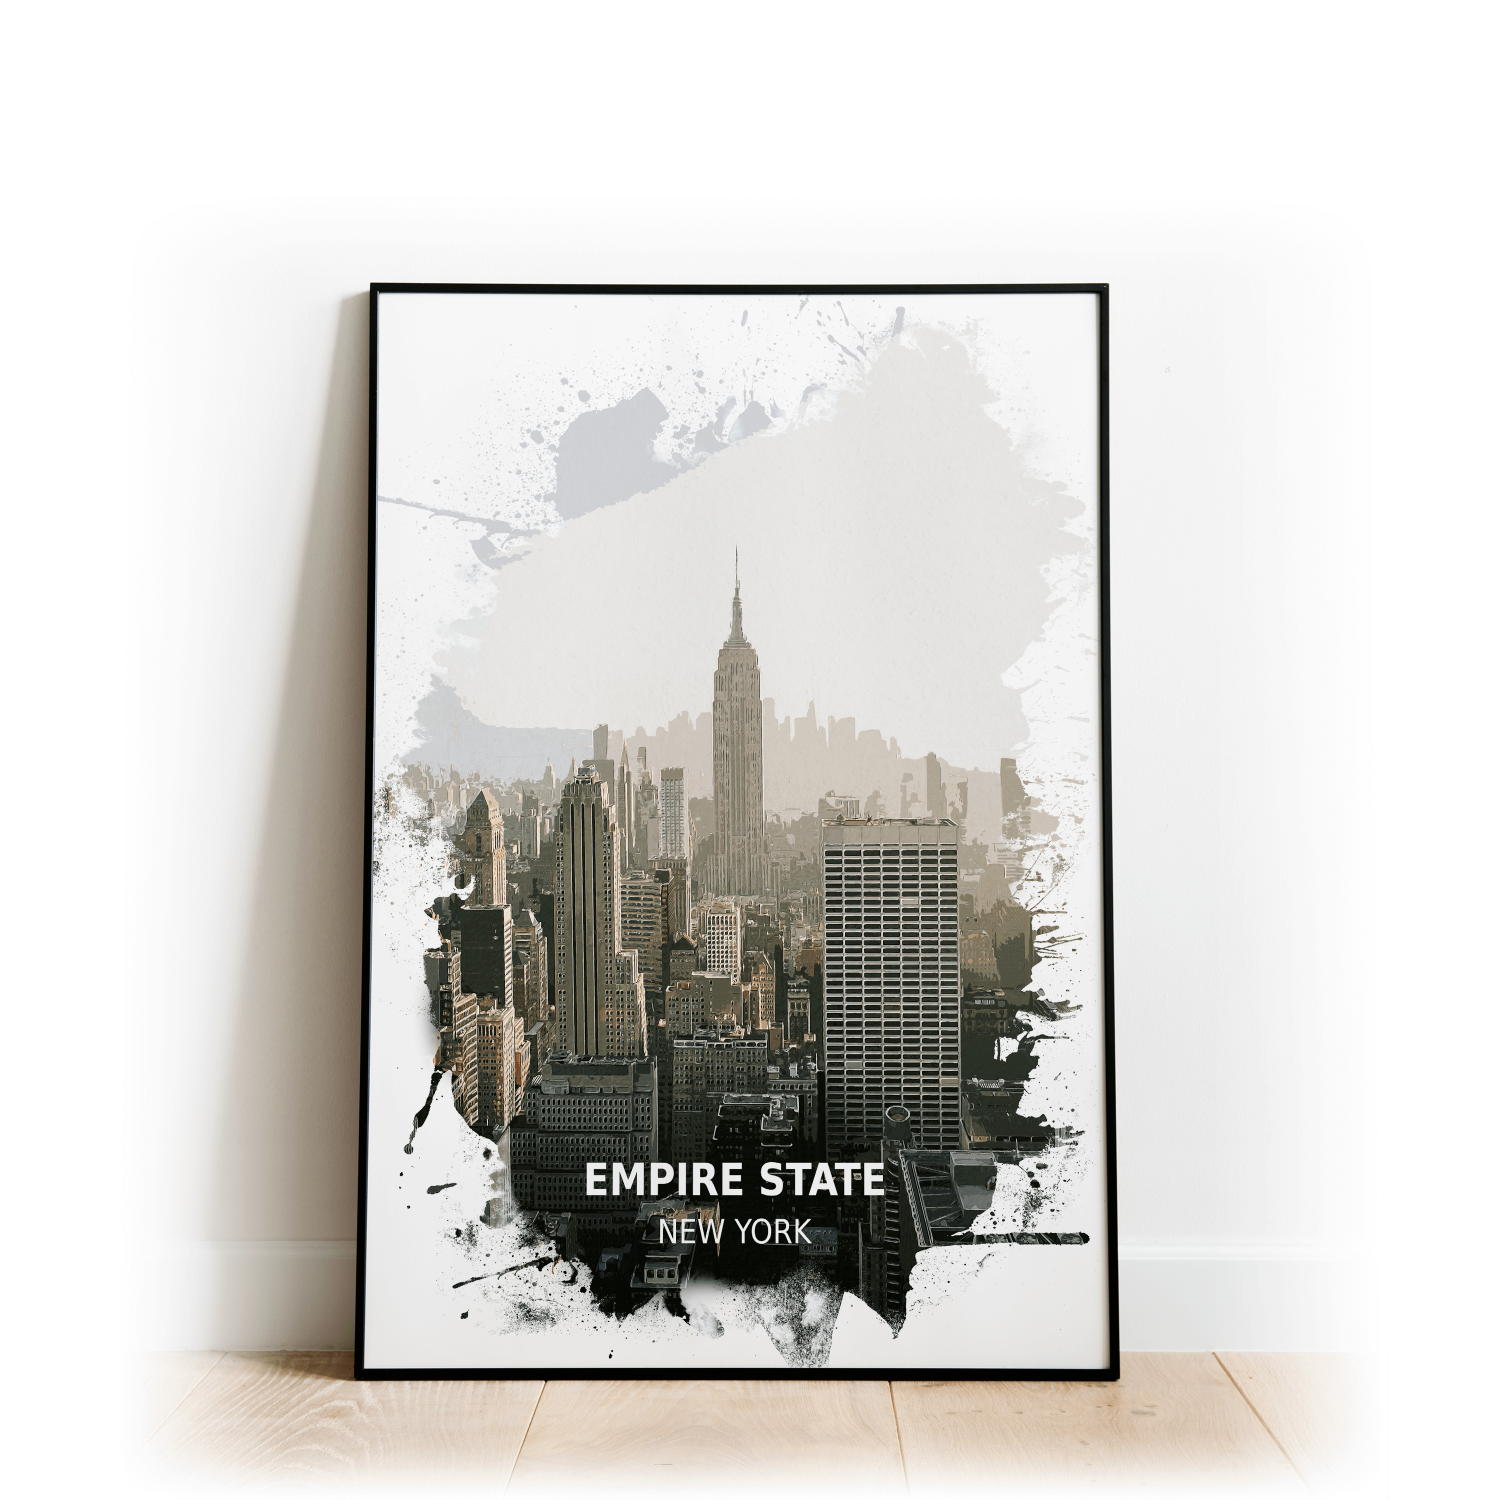 Empire State - New York - Print - A4 - Standard - Print Only